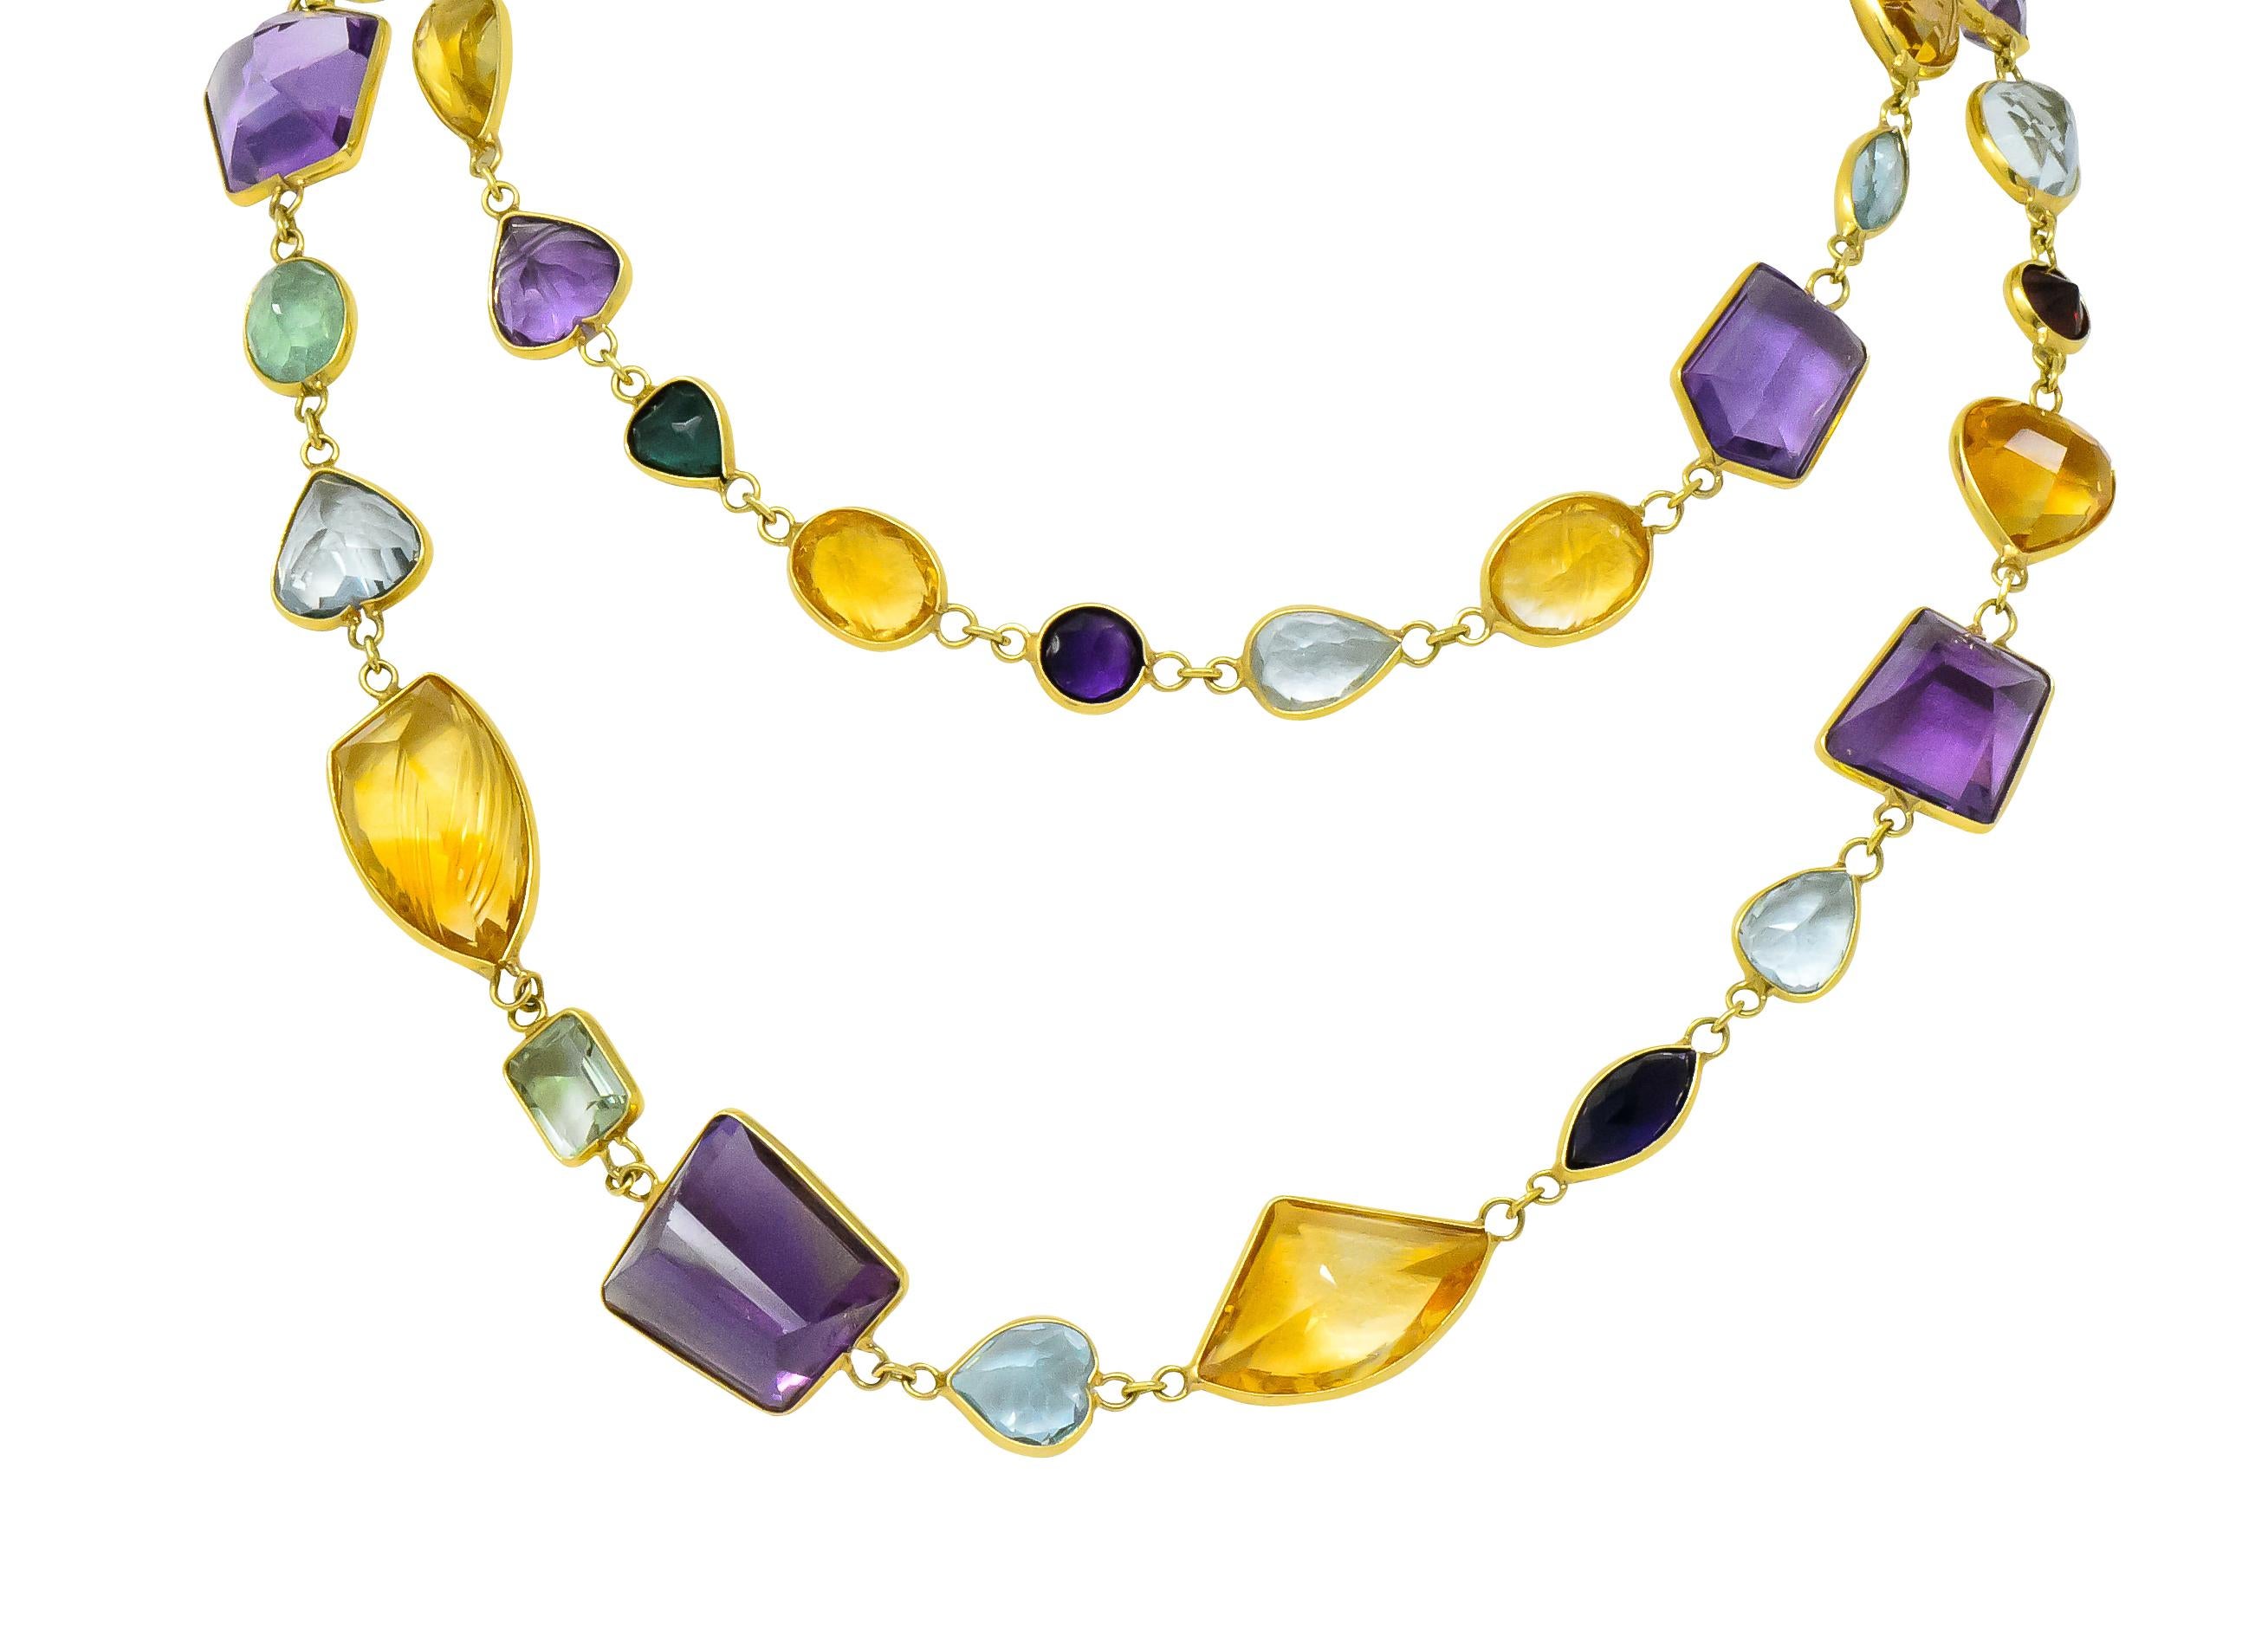 Designed as bezel set fantasy cut gemstones in range of colors and shapes

Comprised of amethyst, citrine, aquamarine, tourmaline, garnet, green quartz

With maker's mark for H. Stern

Circa 1970's

Length: 30 1/2 inches

Total Weight: 60